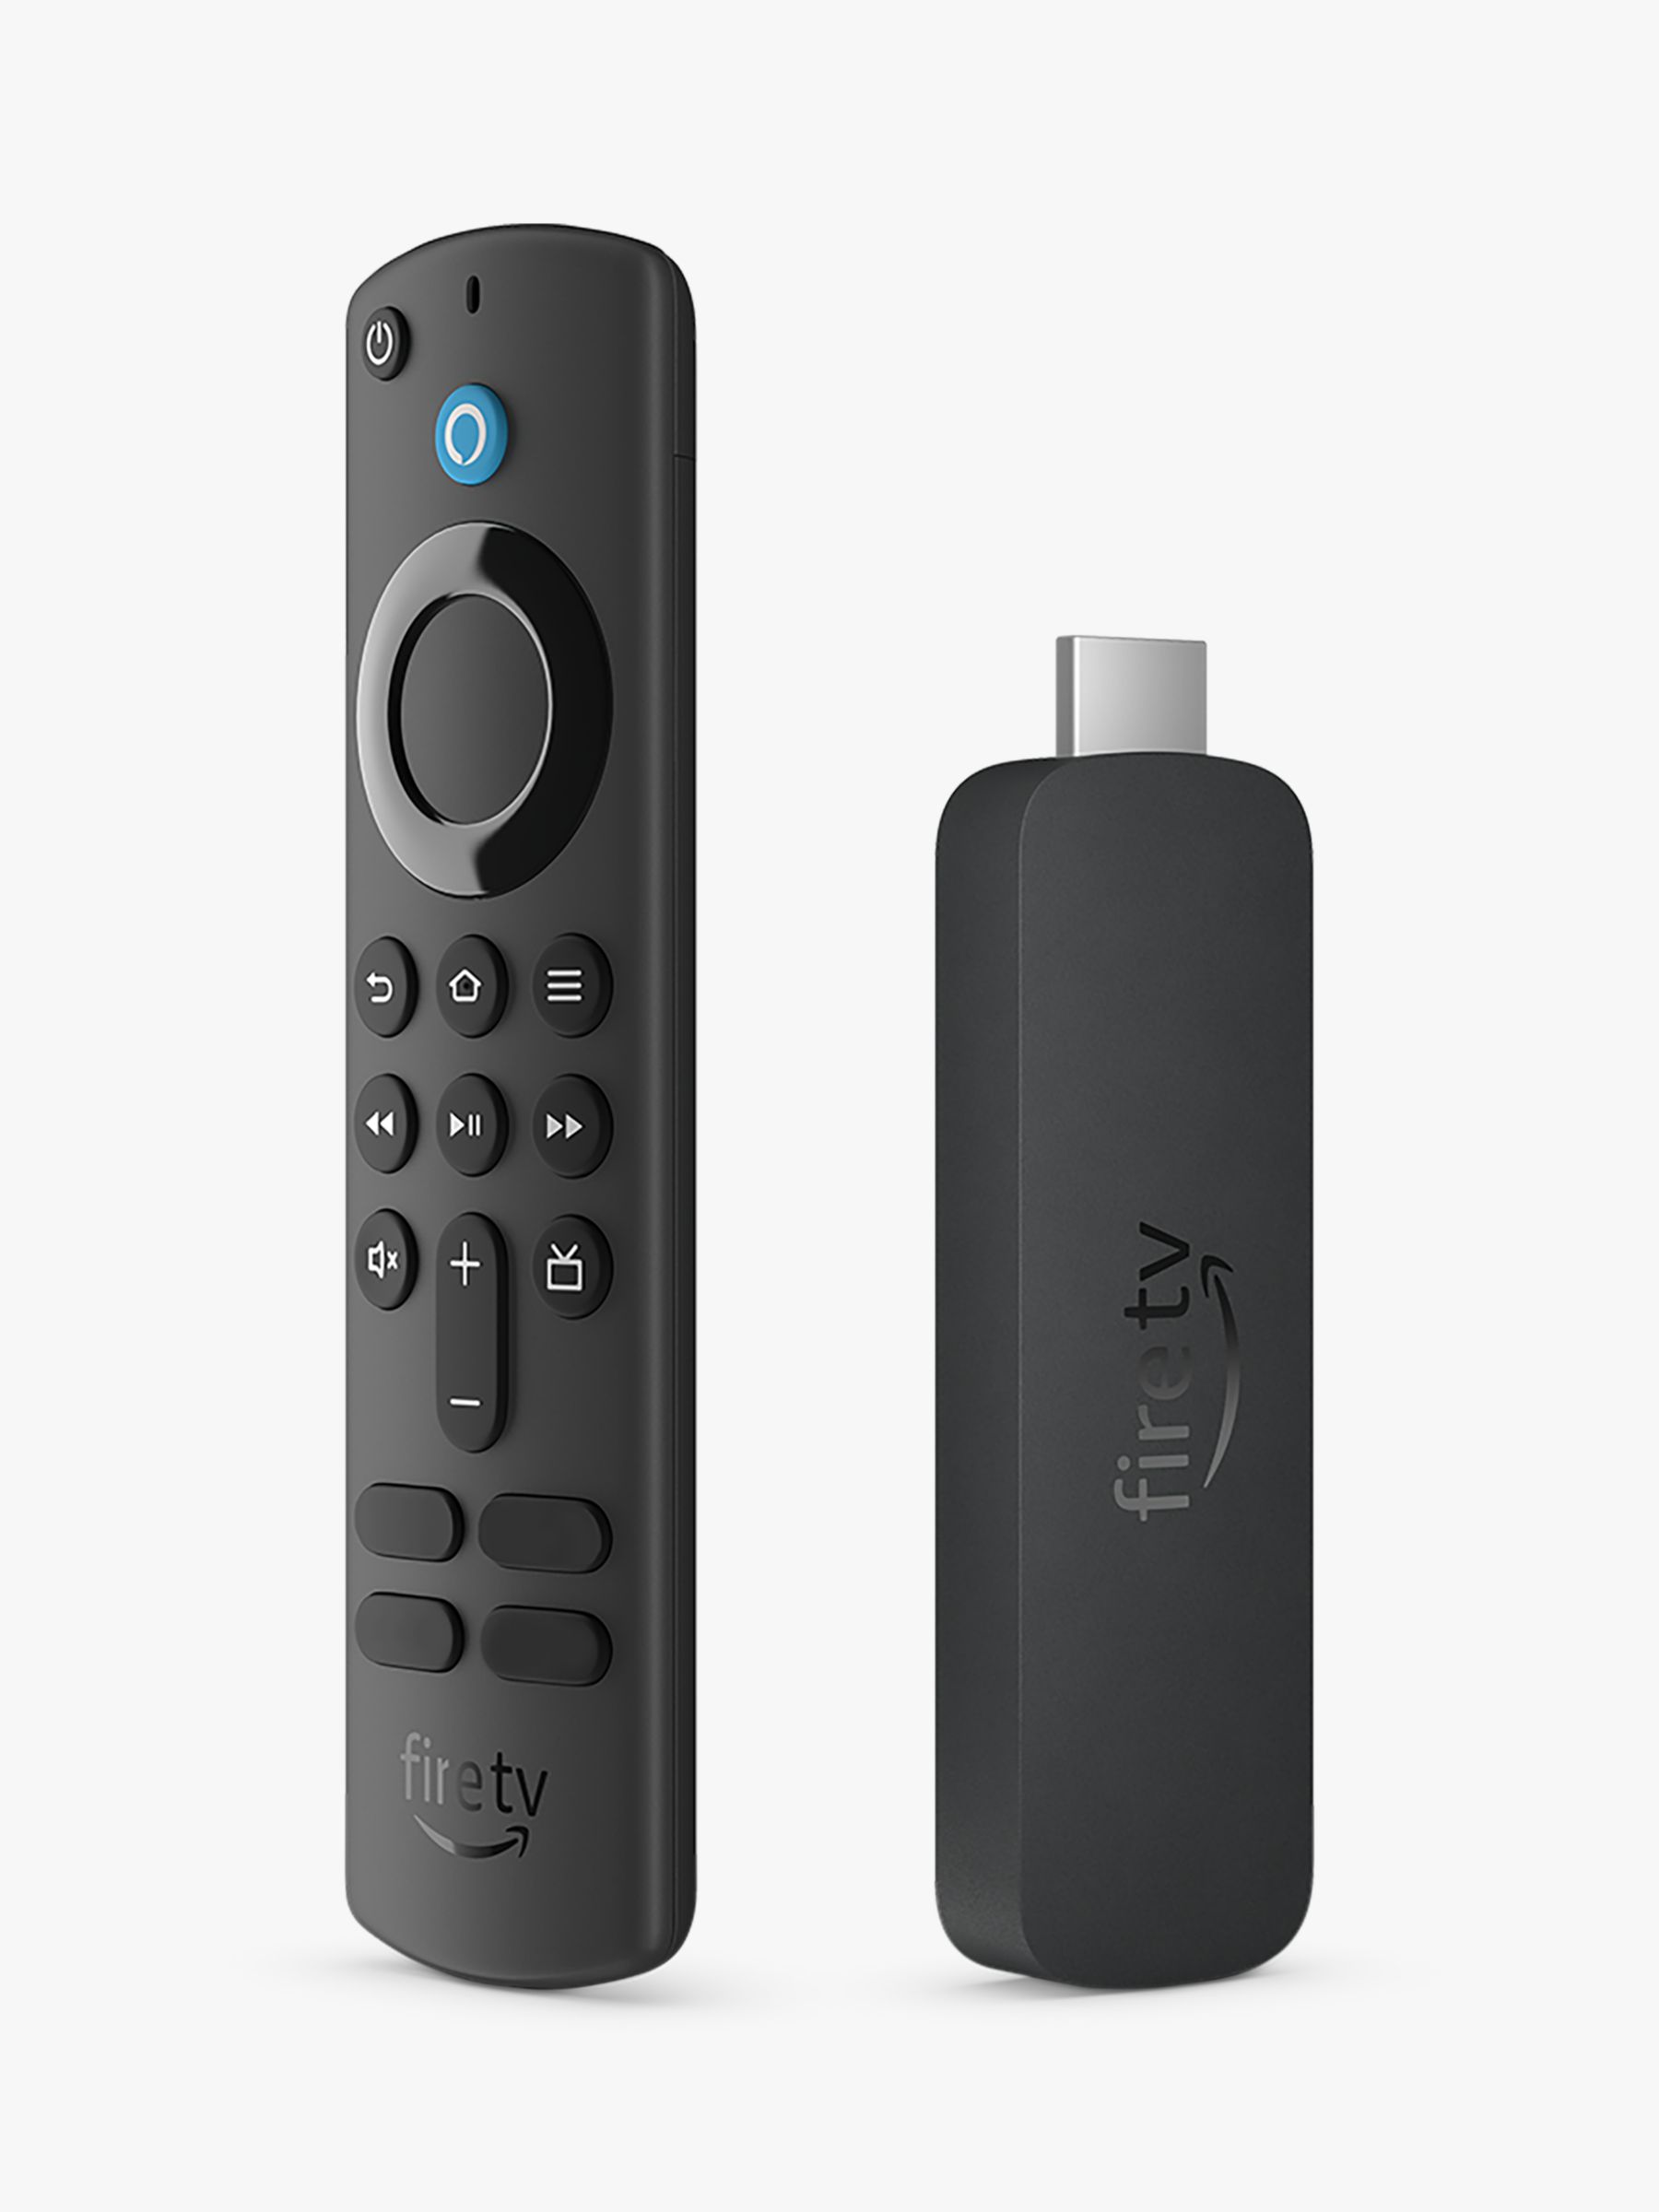 releases new Echo family, next generation Fire TV Stick and Wi-Fi 6  